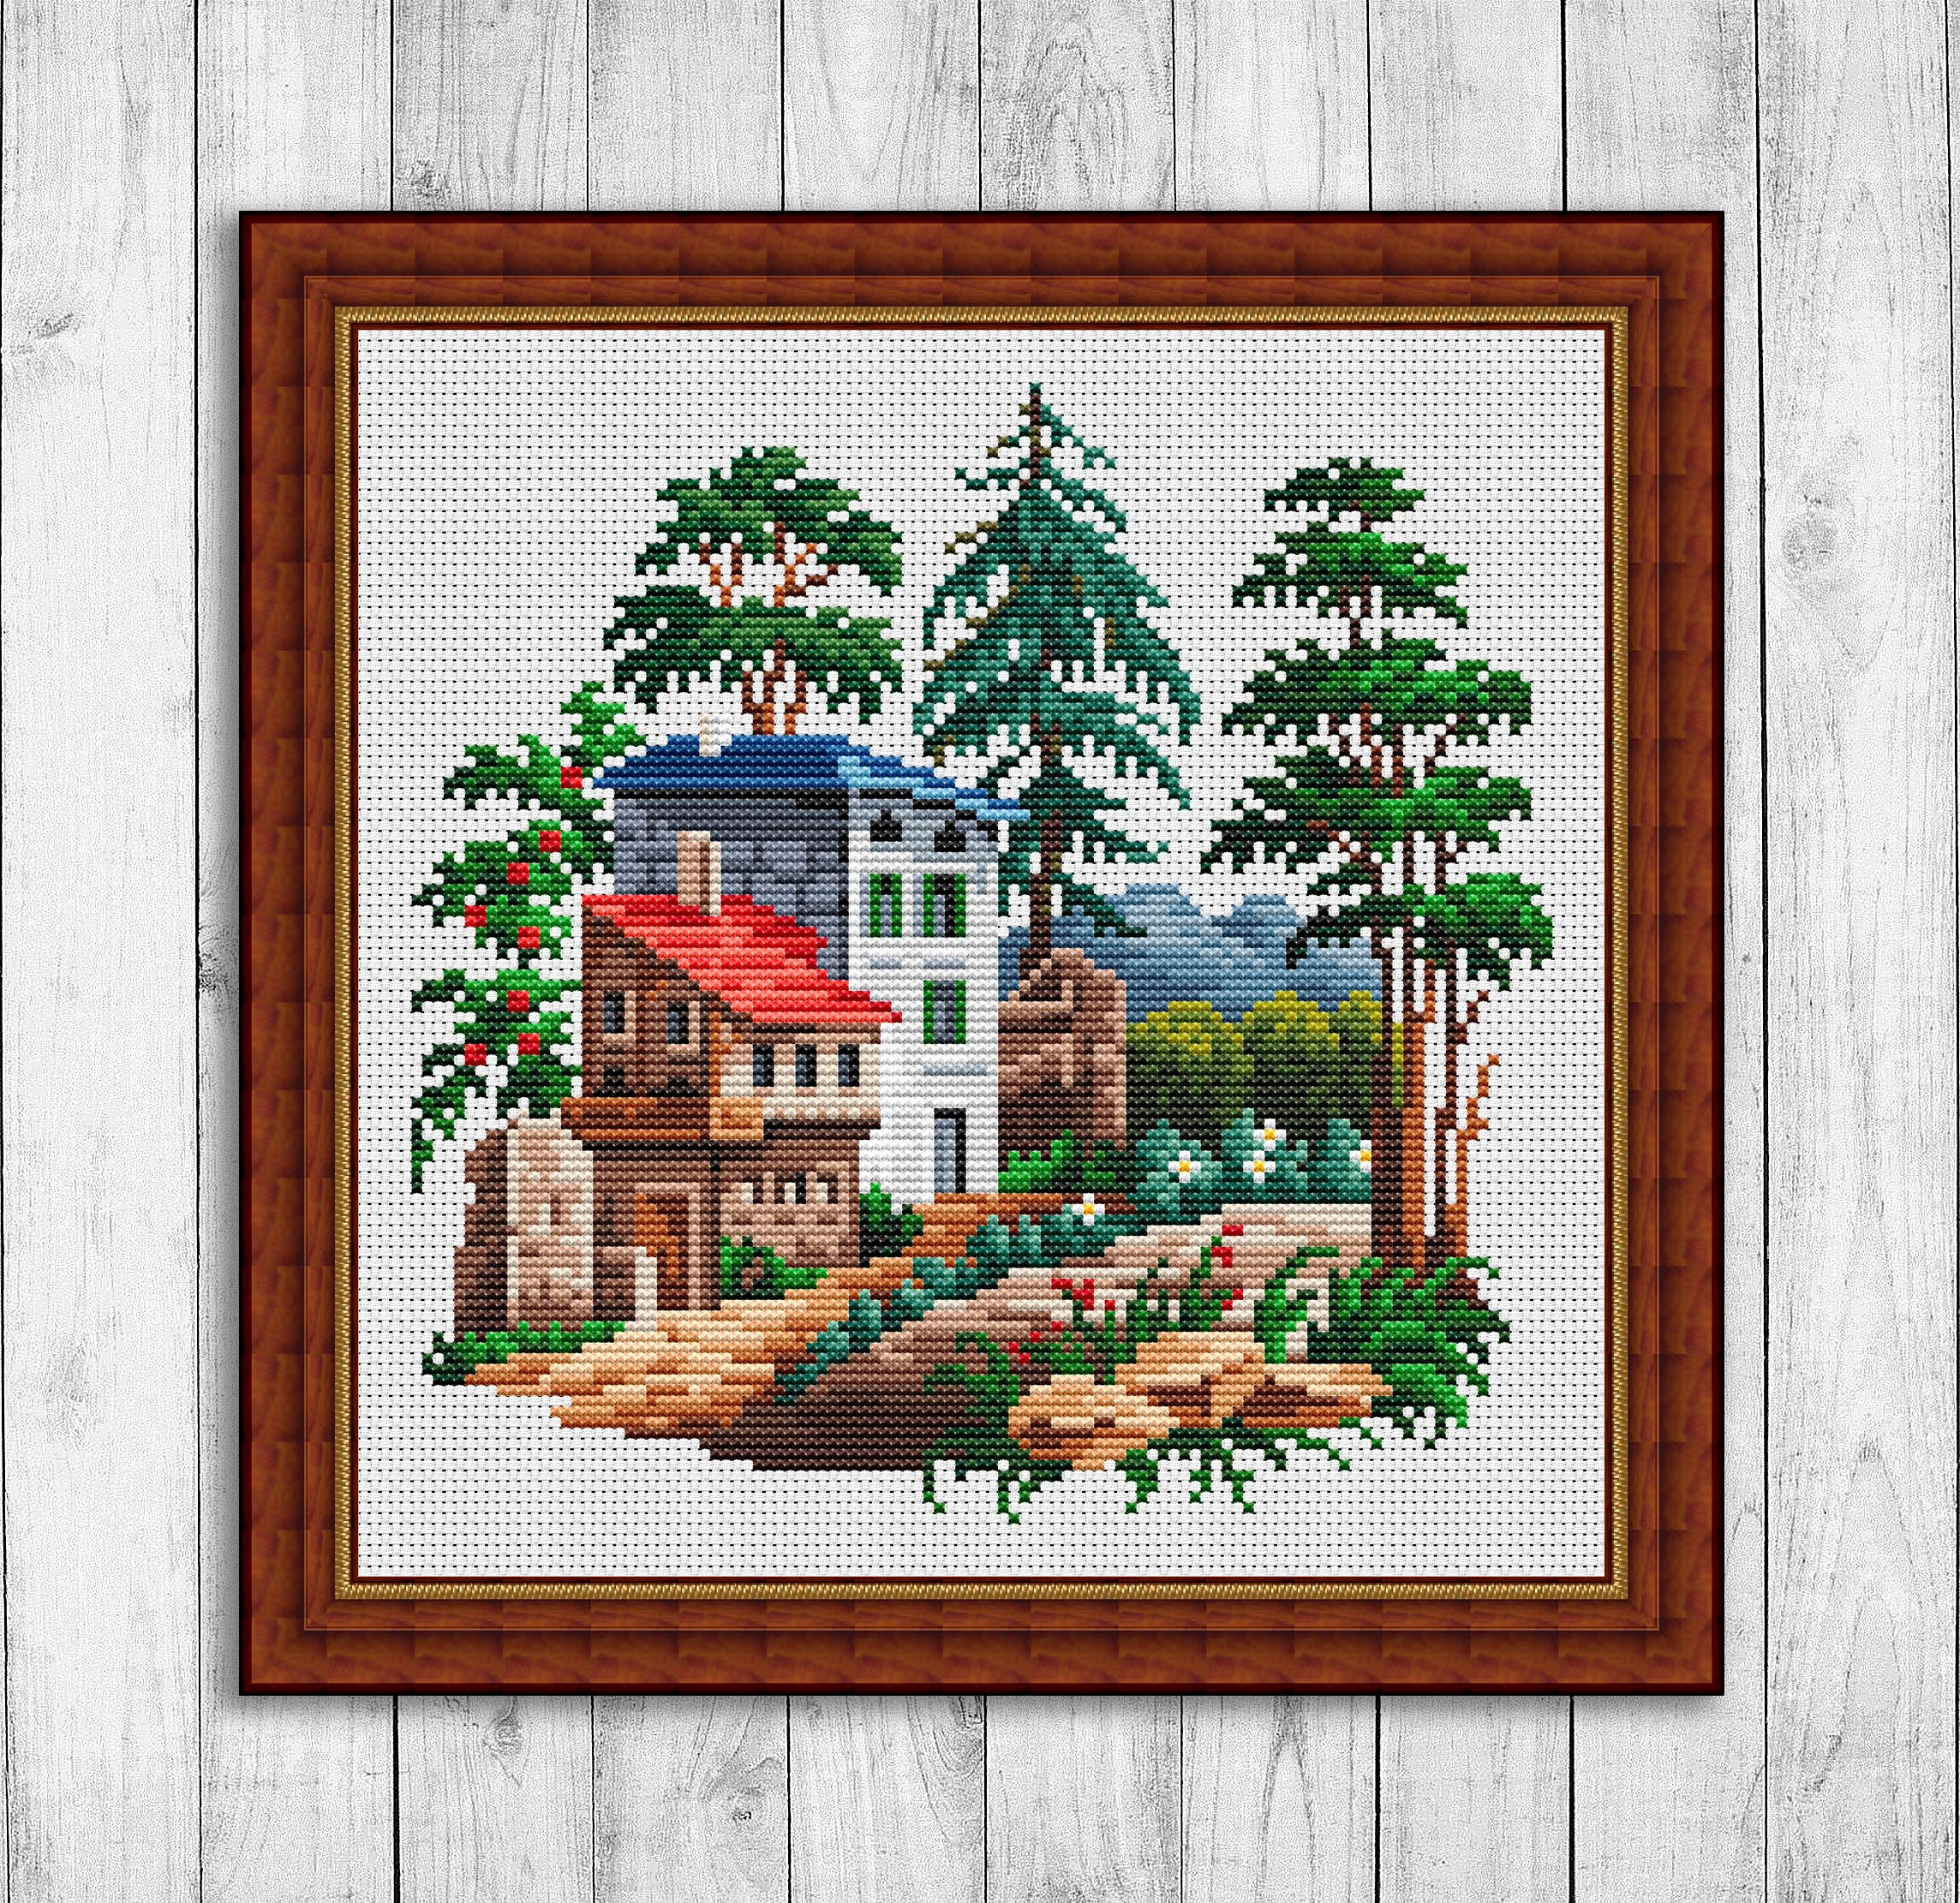 Where to Find FREE Cross Stitch Patterns - The Birch Cottage